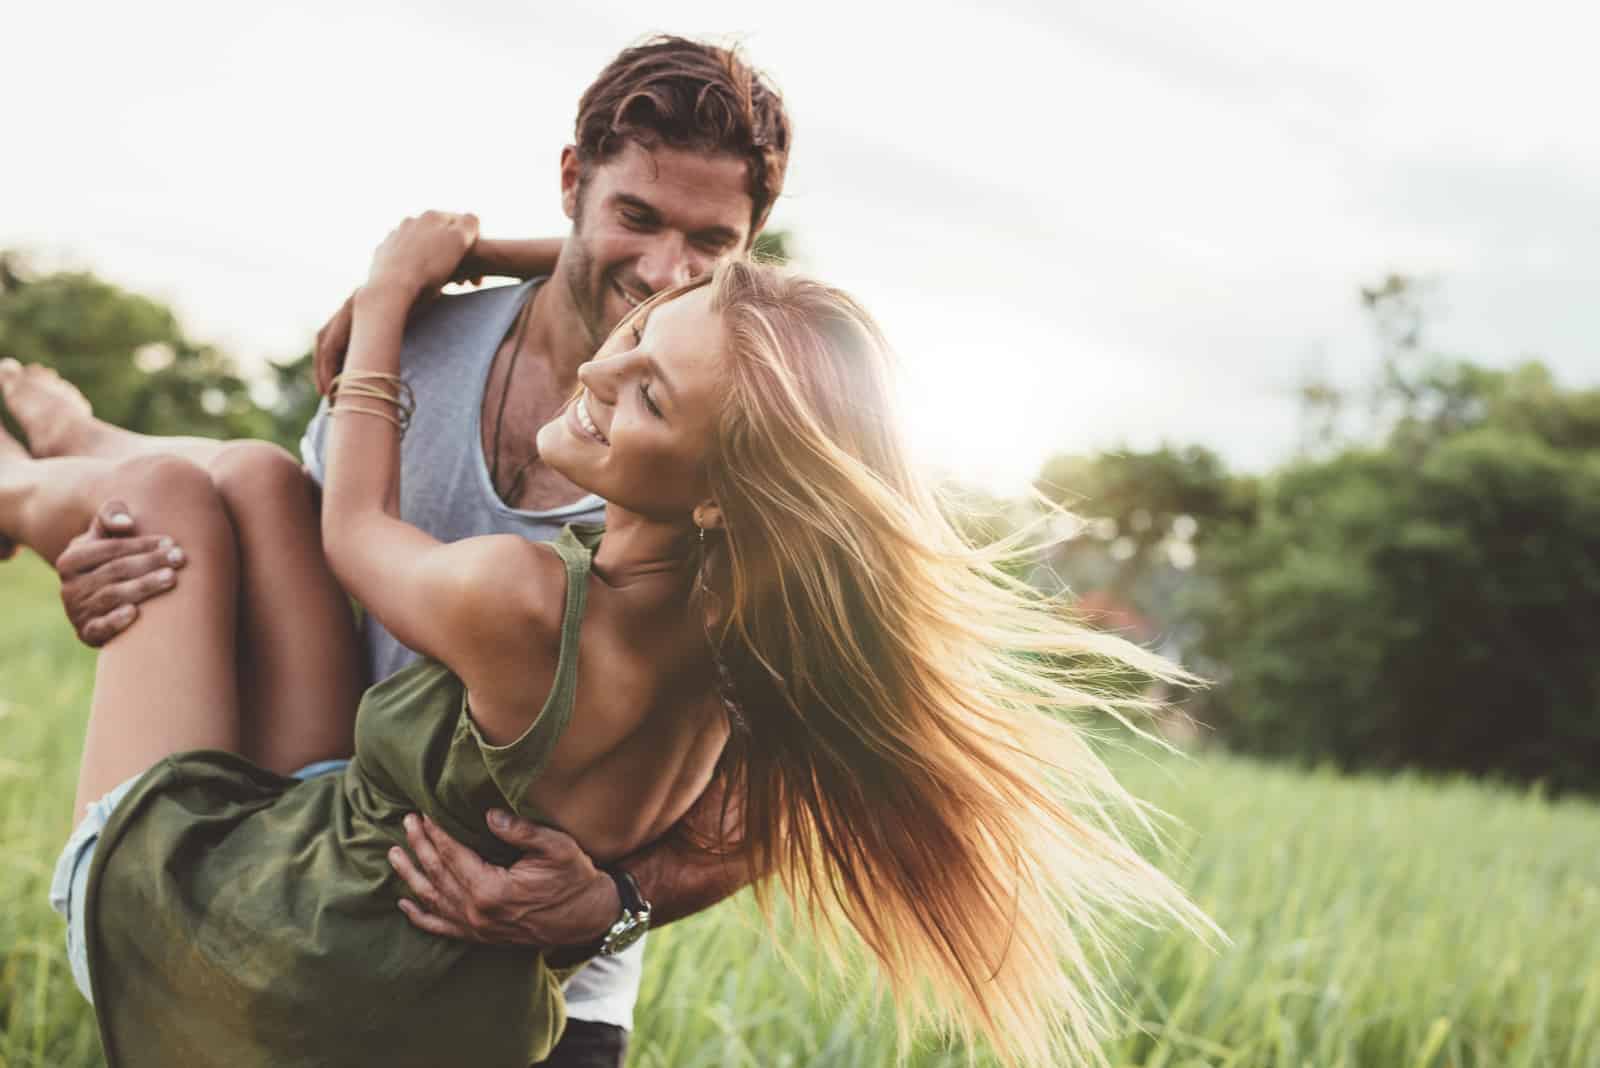 young woman being carried by her boyfriend in grass field